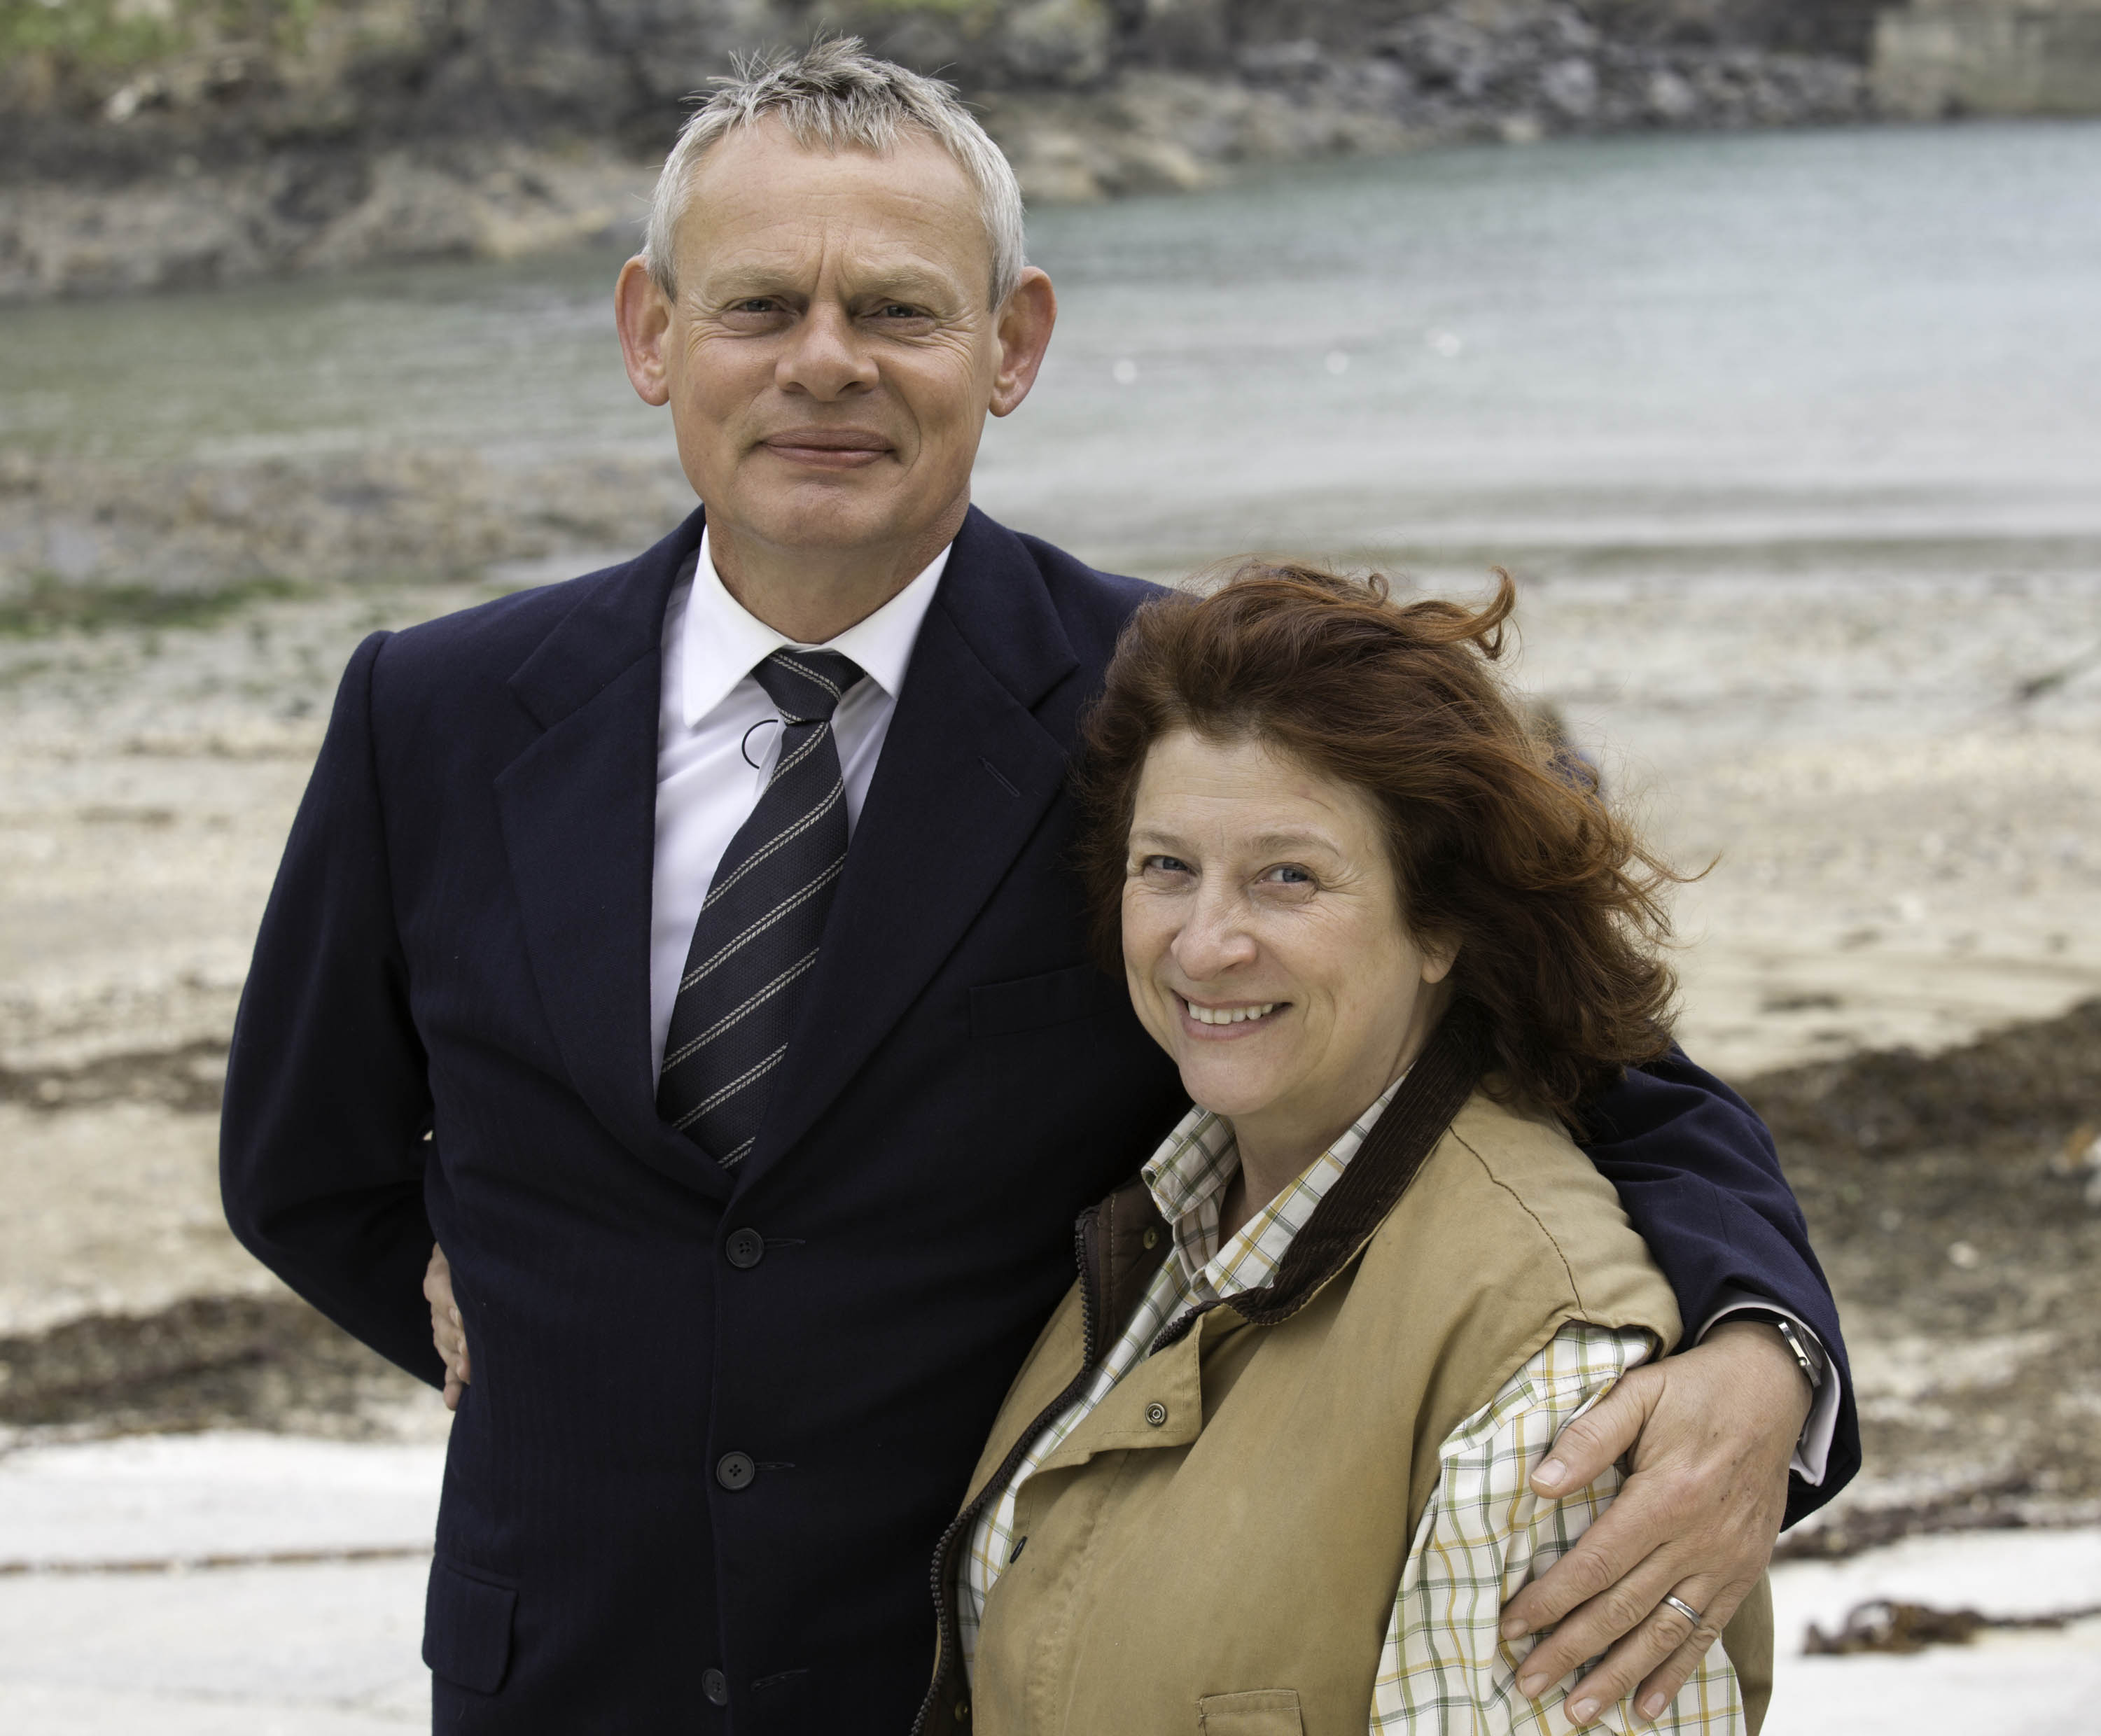 Martin Clunes reveals his hysterical reunion with Caroline Quentin on